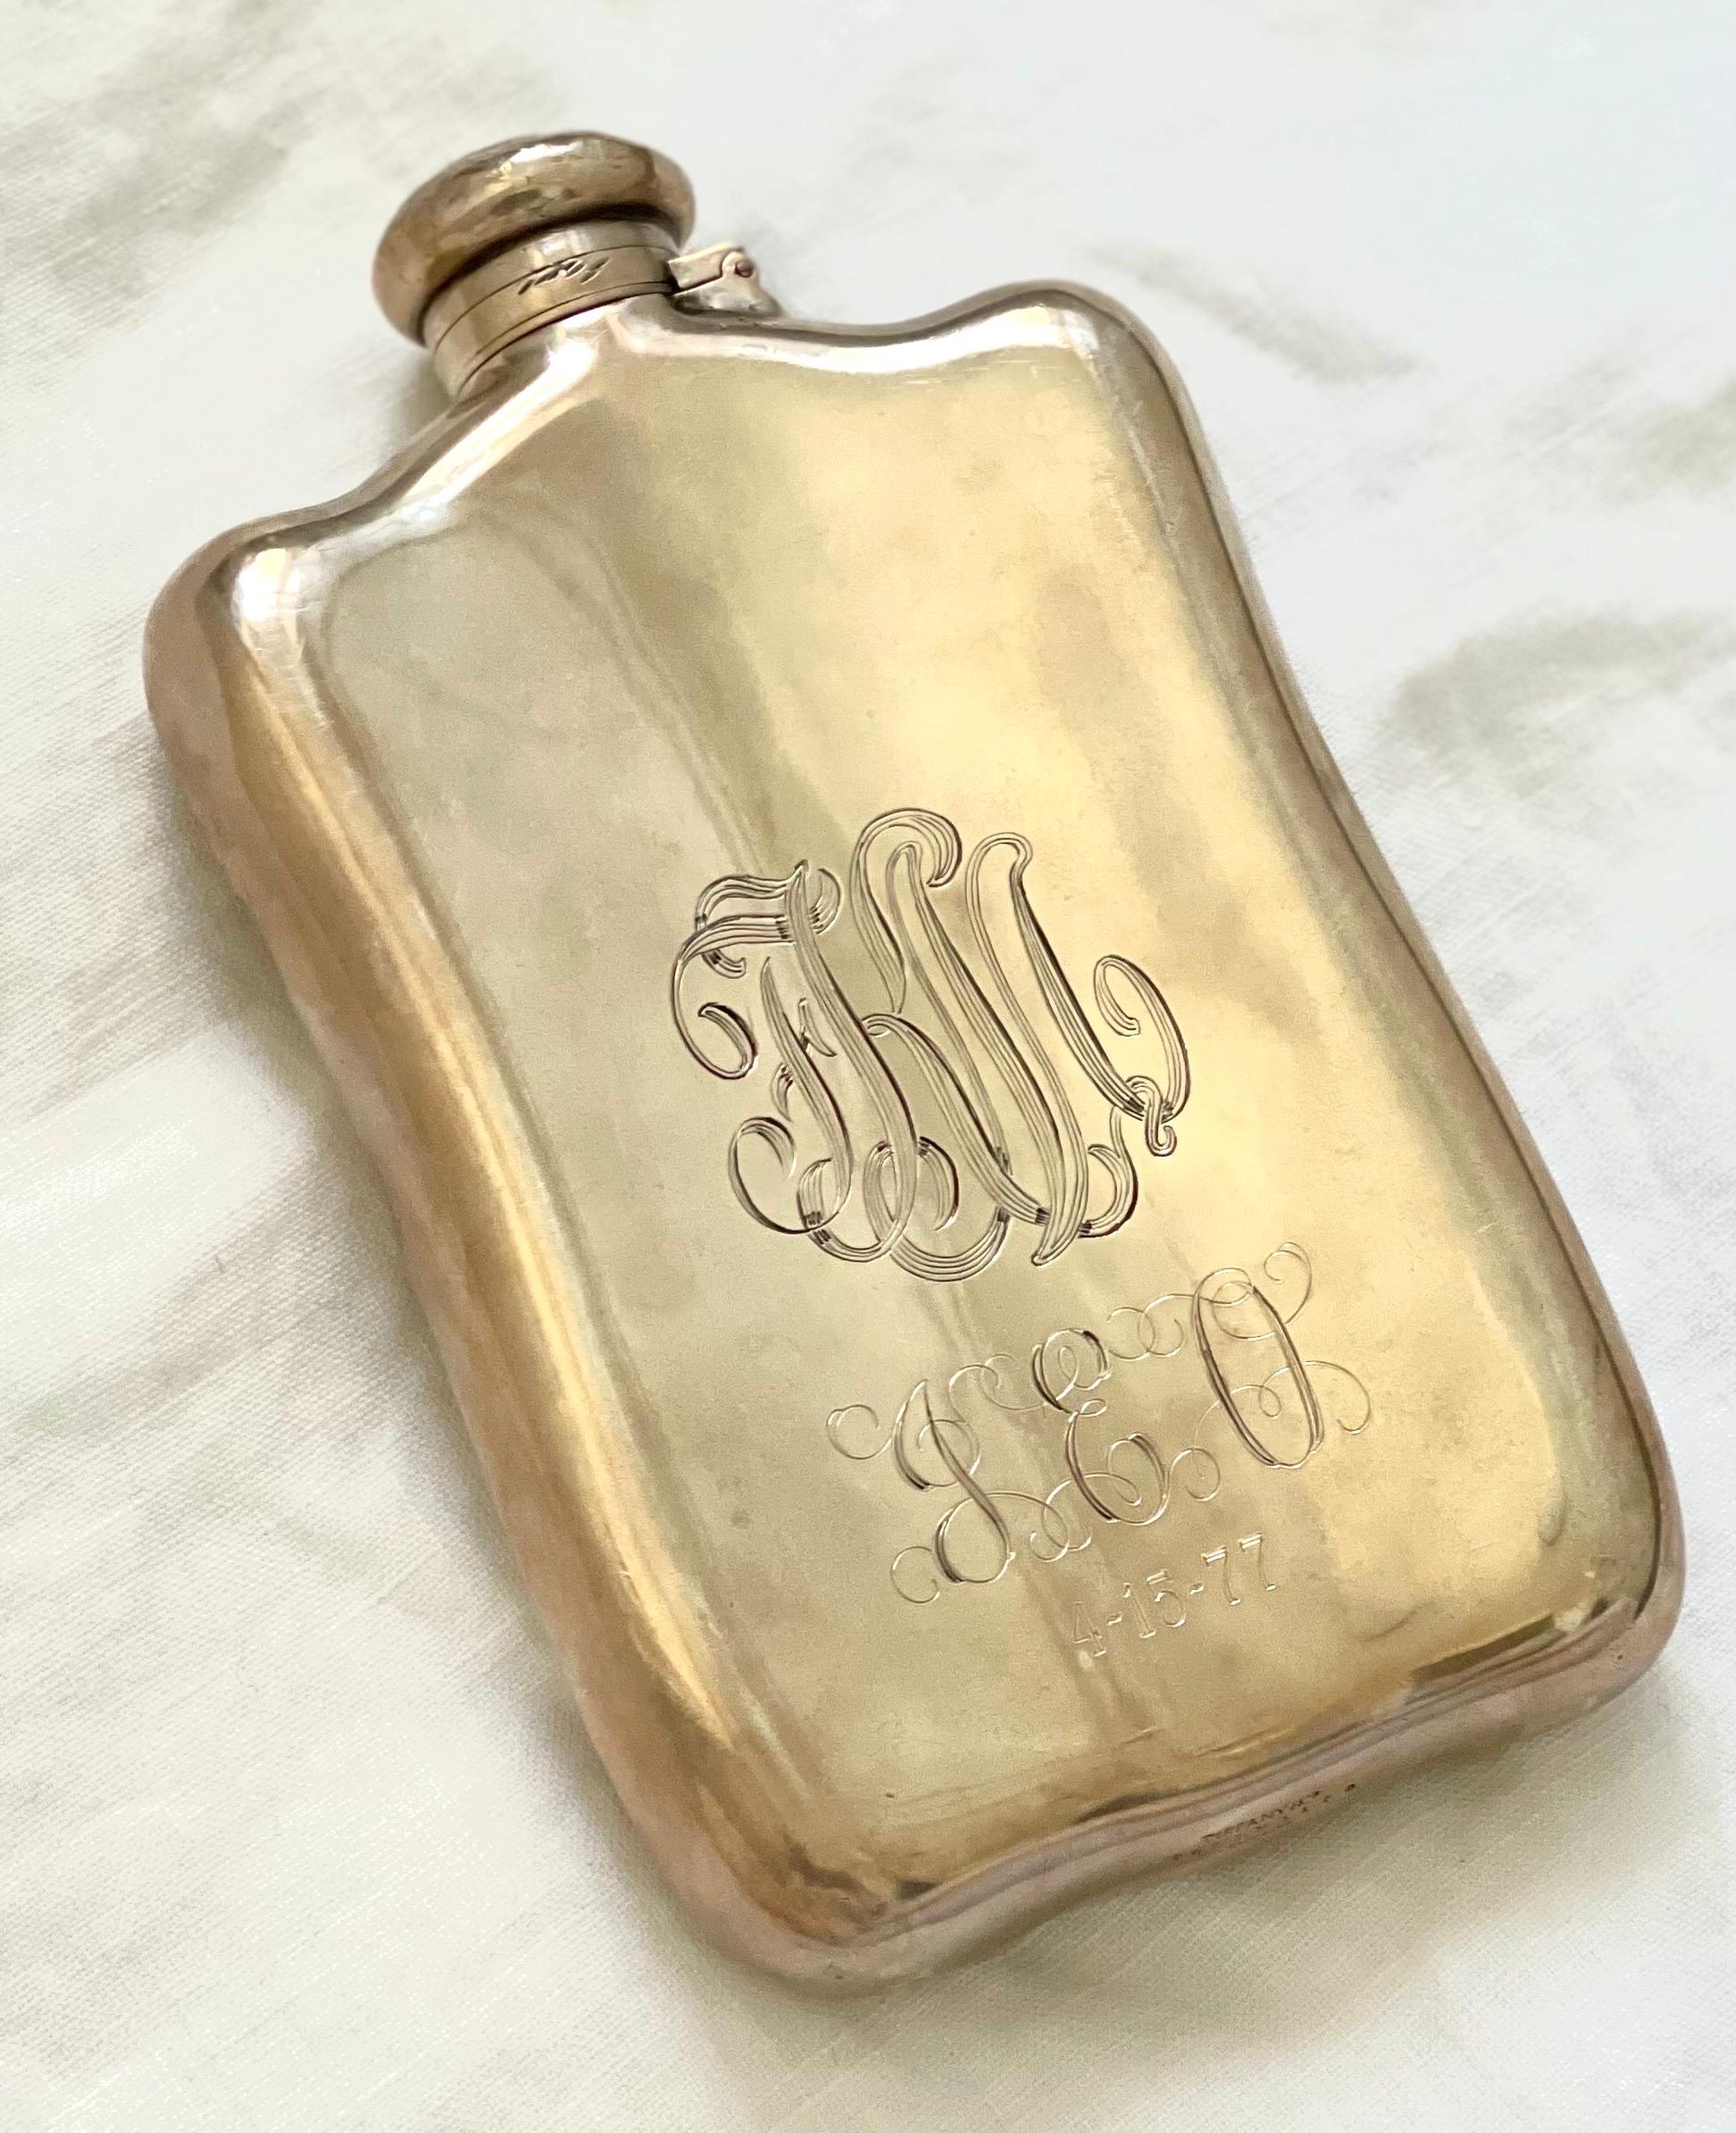 This Tiffany Sterling Silver Flask with full marks for 1882 might be the most fully articulated narrative in Tiffany flask history — and that’s saying a lot, given the talent of chasers and engravers for the firm in this period. Three top-hatted